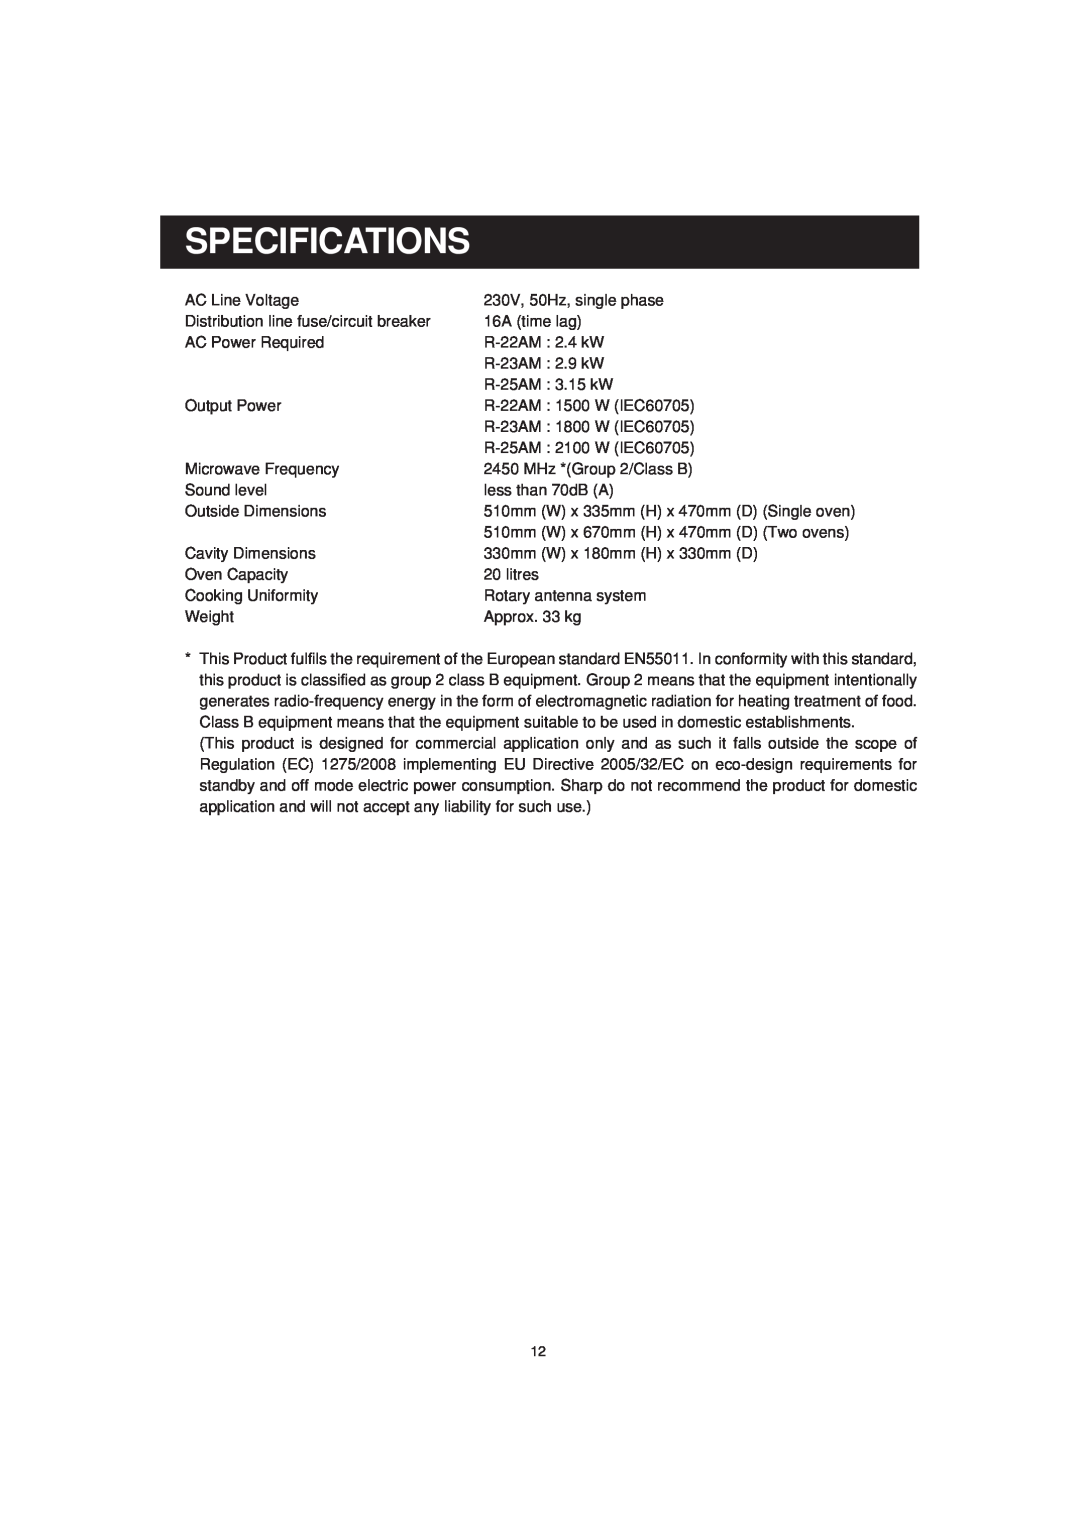 Sharp R-25AM, R-23AM, R-22AM operation manual Specifications 